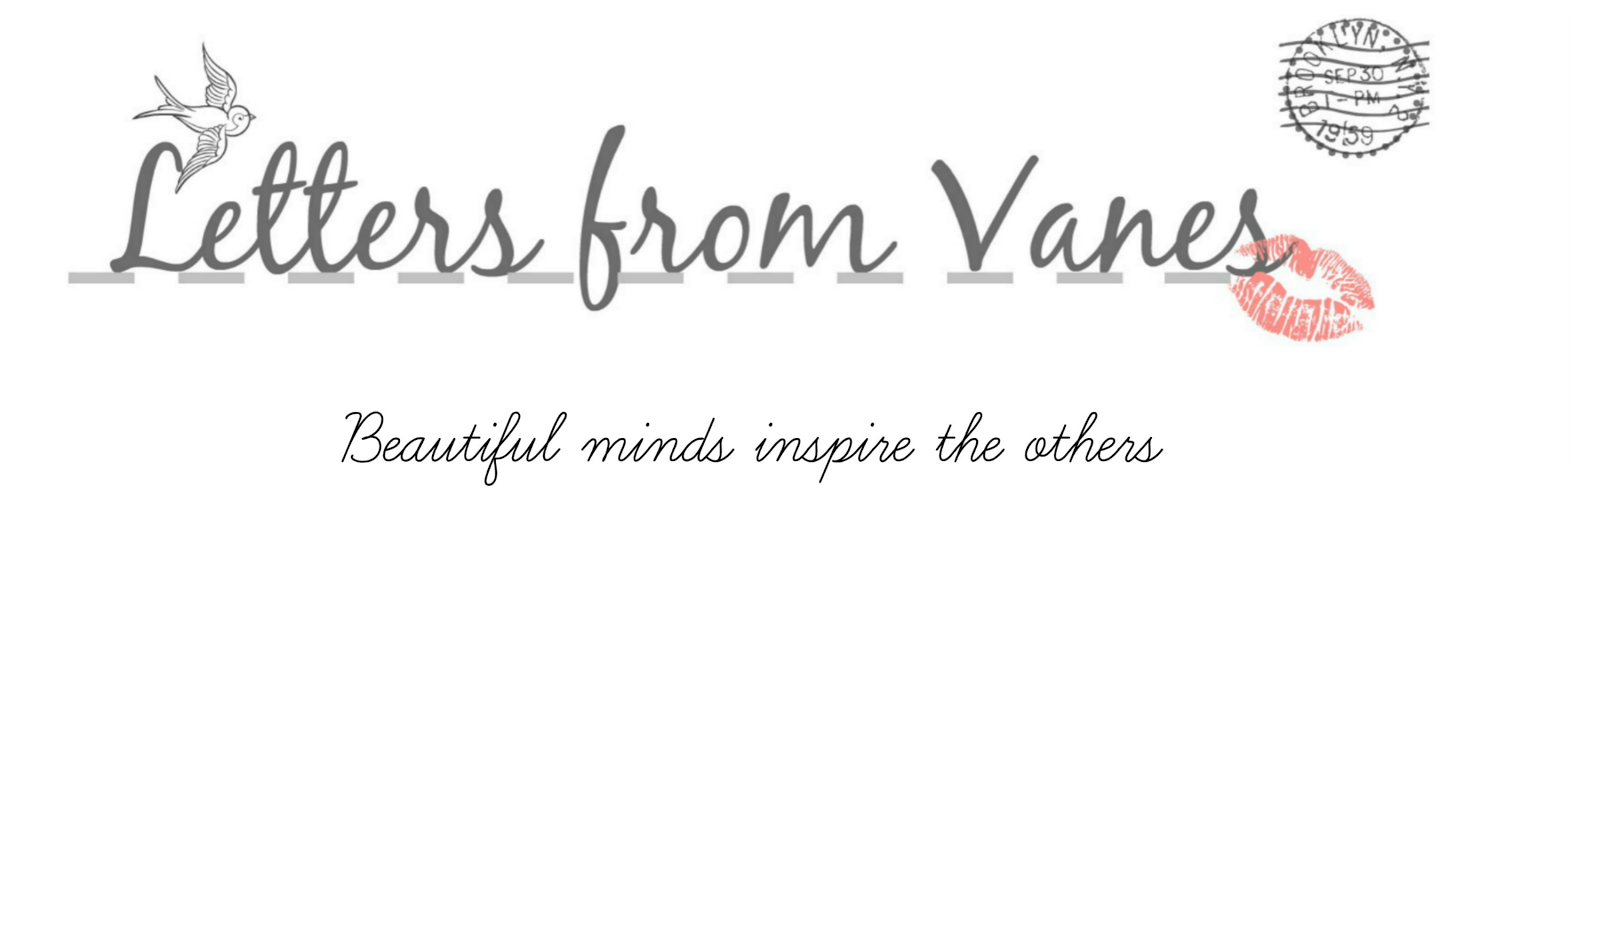 Letters from Vanes